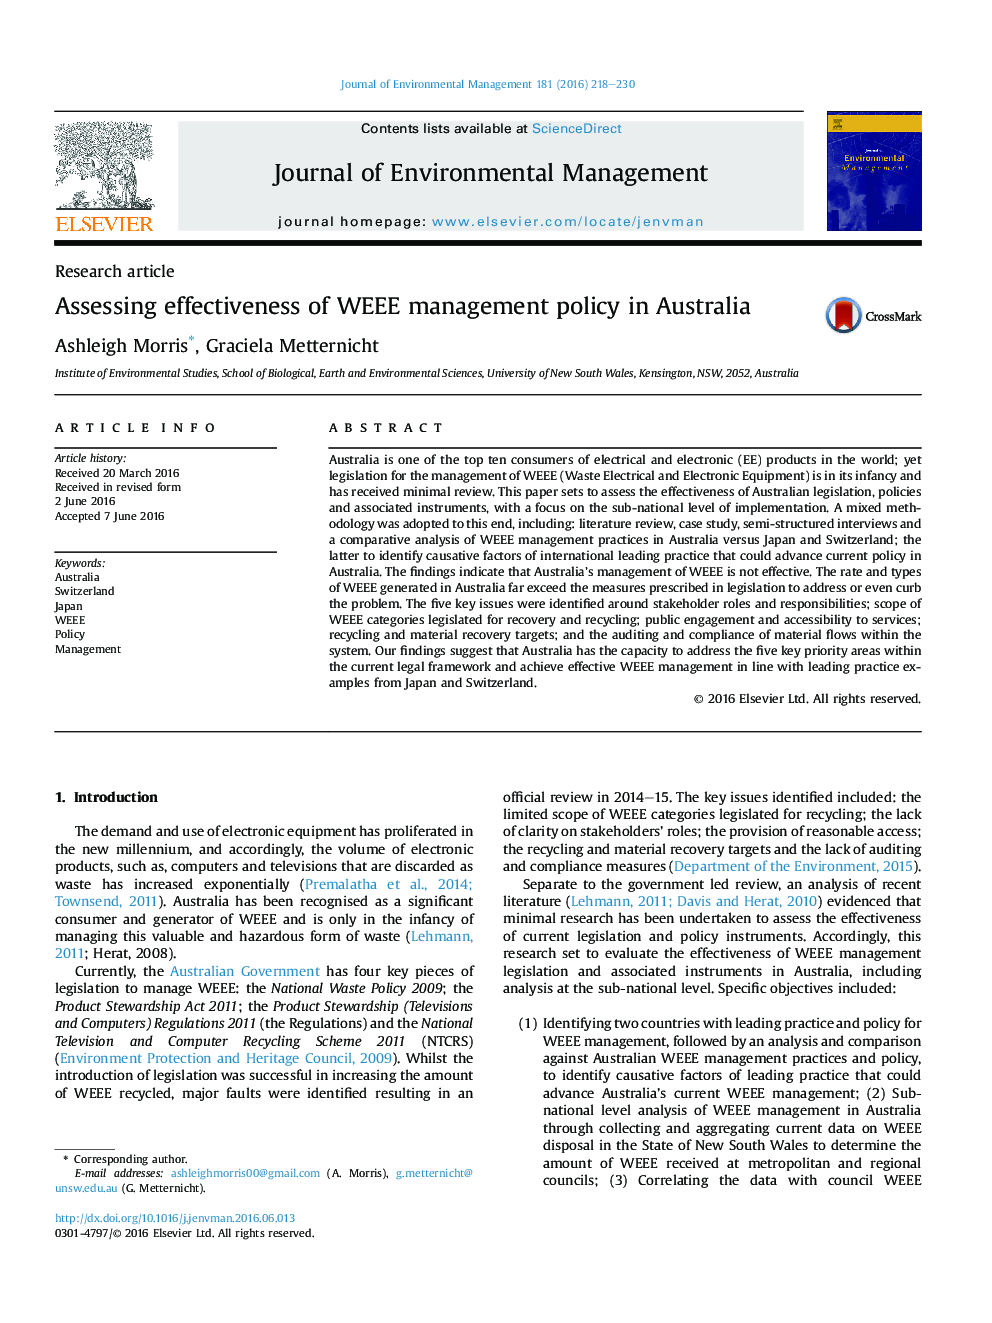 Assessing effectiveness of WEEE management policy in Australia